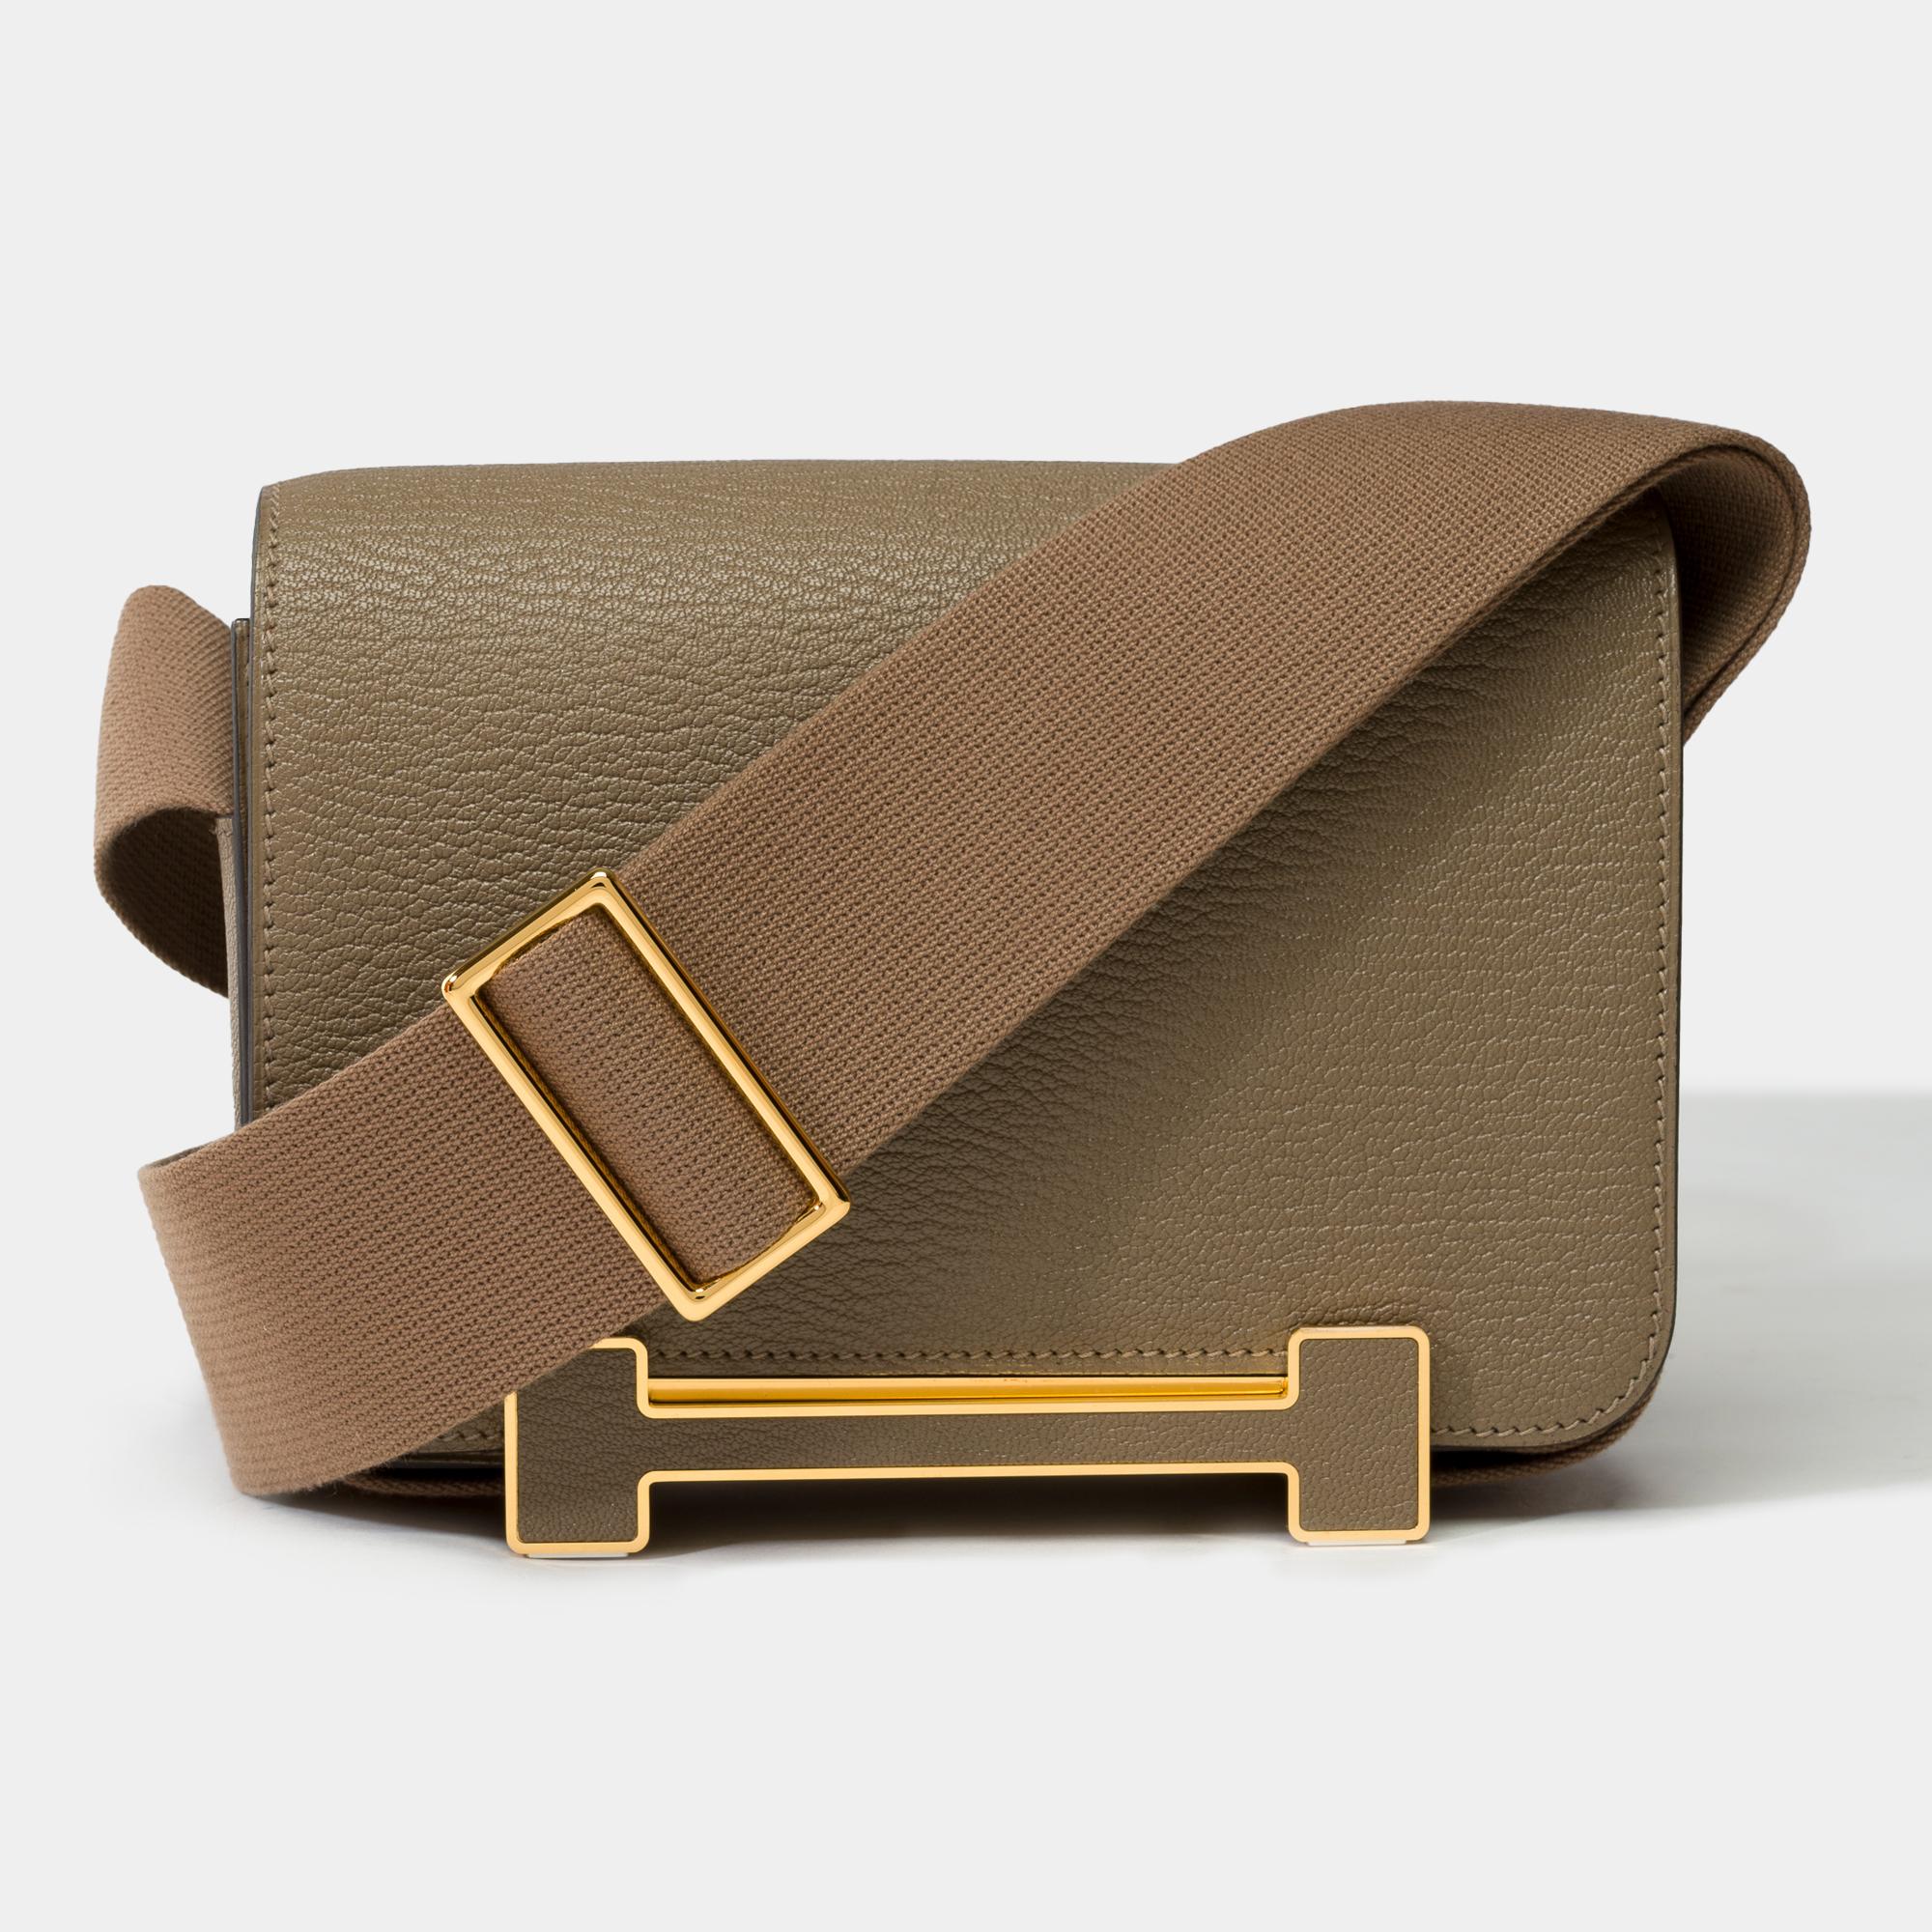 Amazing​ ​Hermes​ ​Geta​ ​shoulder​ ​bag​ ​in​ ​etoupe​ ​Chevre​ ​Mysore​​ (Goat) ​leather,​ ​gold​ ​plated​ ​metal​ ​trim,​ ​an​ ​adjustable​ ​strap​ ​in​ ​étoupe​ ​canvas​ ​for​ ​shoulder​ ​or​ ​crossbody​ ​carry

Logo​ ​closure​ ​on​